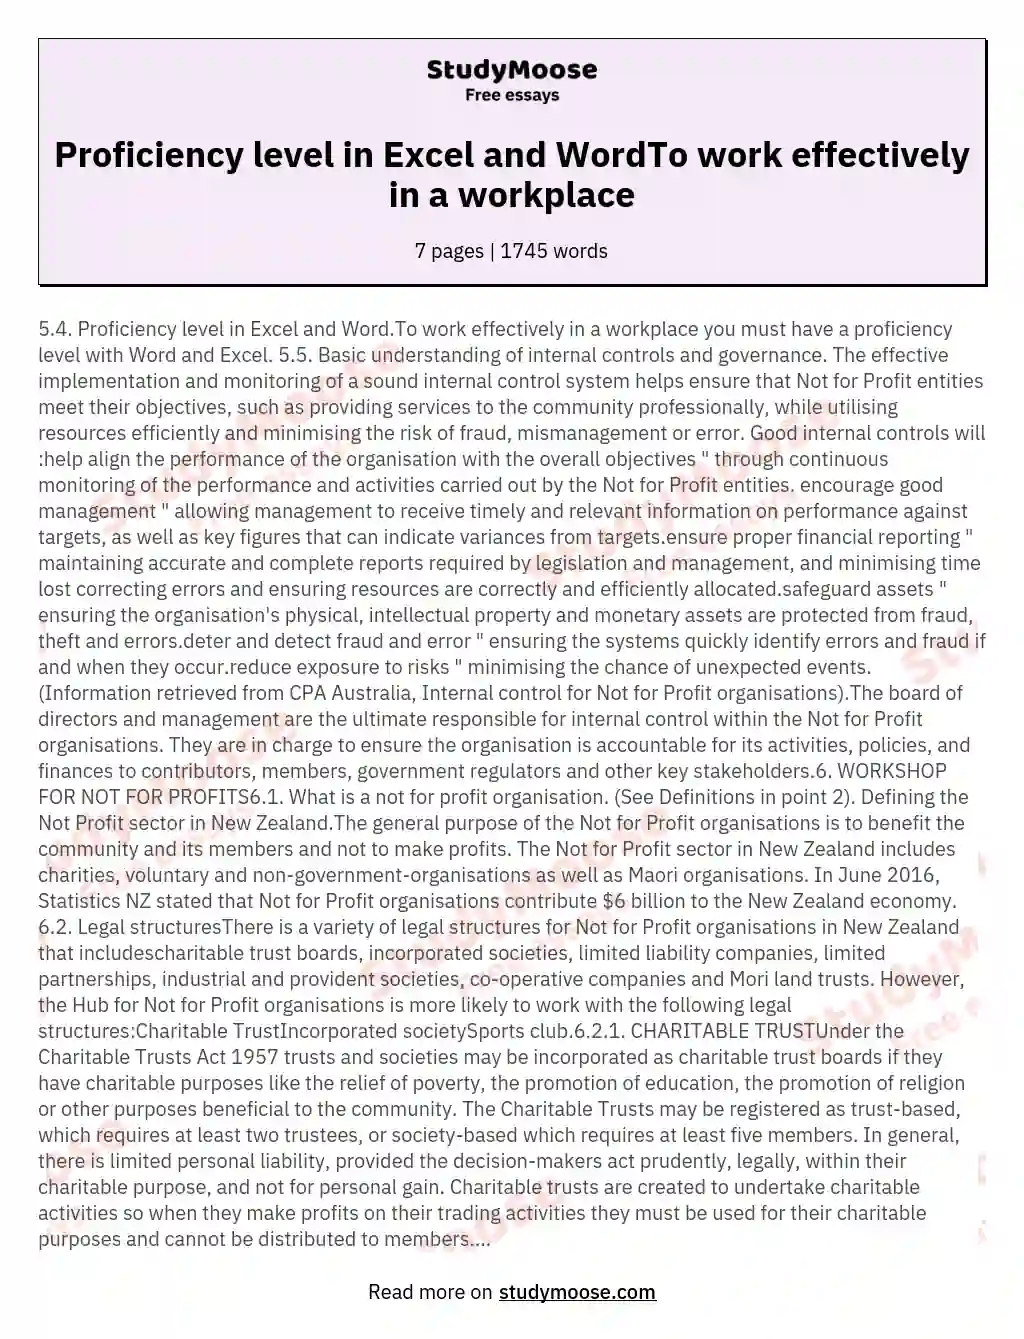 Proficiency level in Excel and WordTo work effectively in a workplace essay